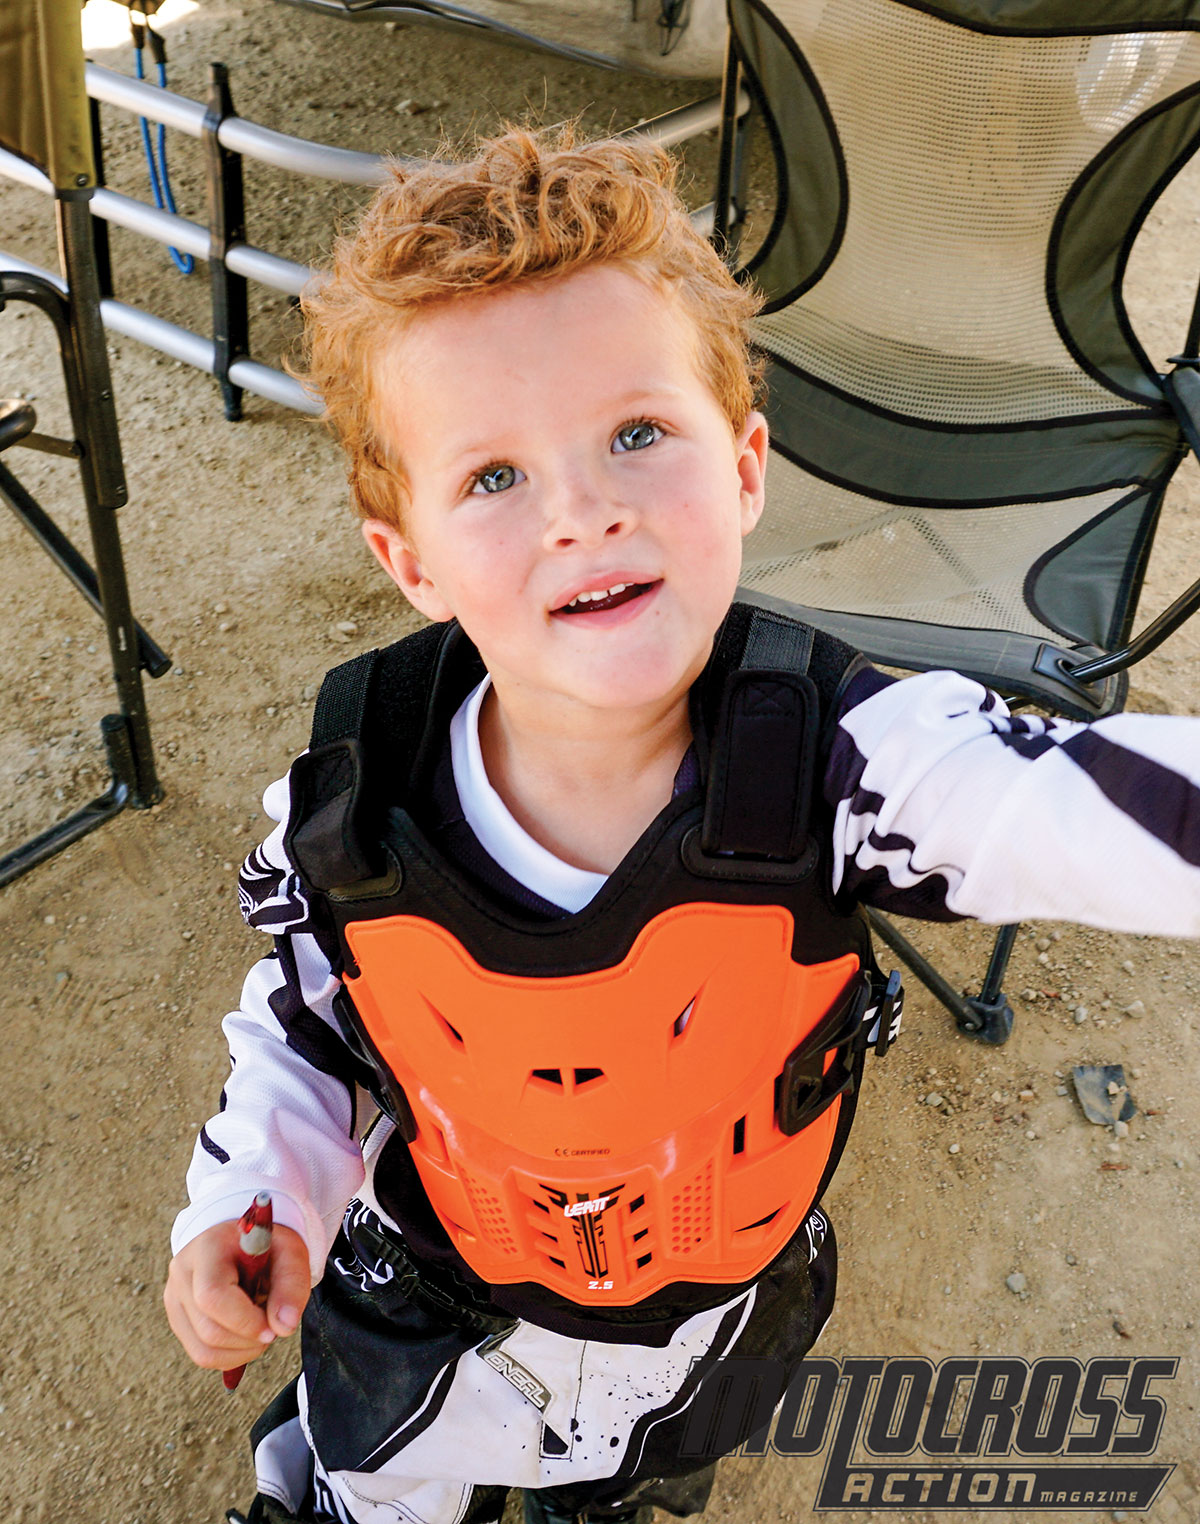 NEW GP-PRO KIDS MOTOCROSS MX BODY ARMOUR PROTECTOR JACKET CHILDS CHILDRENS BOYS 